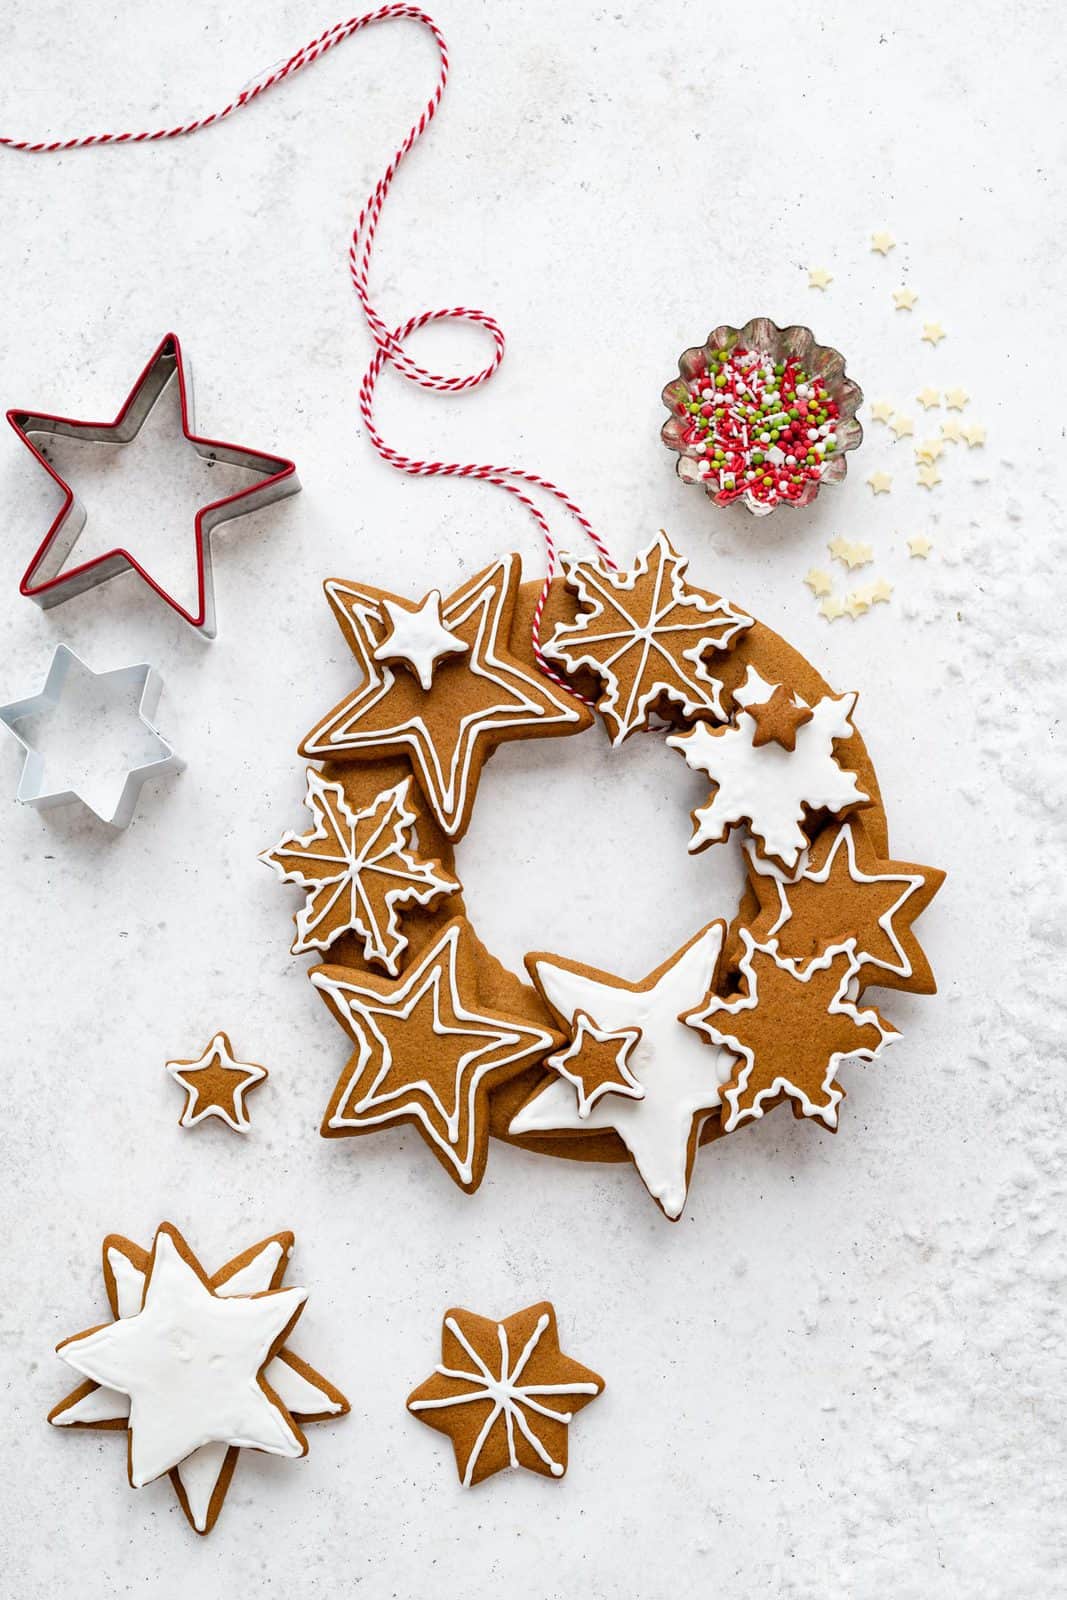 Gingerbread Cookie wreath with cut out star cookies